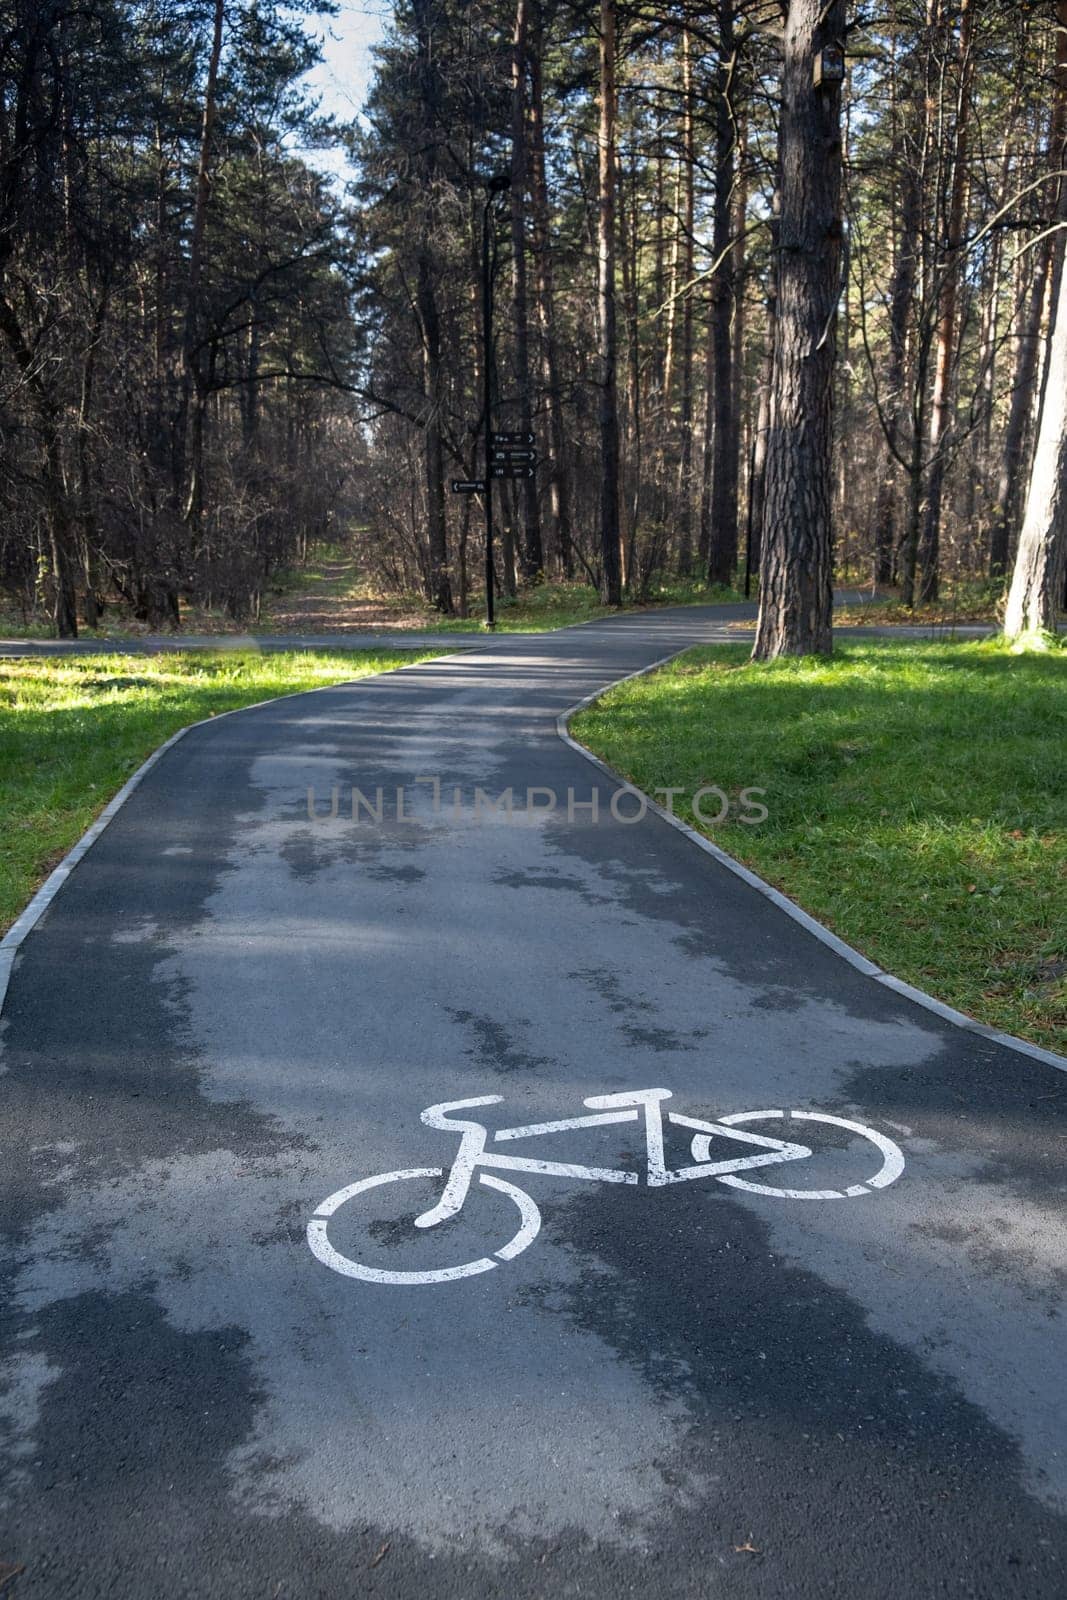 A signpost or bicycle road sign painted on the asphalt in a city park. by AnatoliiFoto